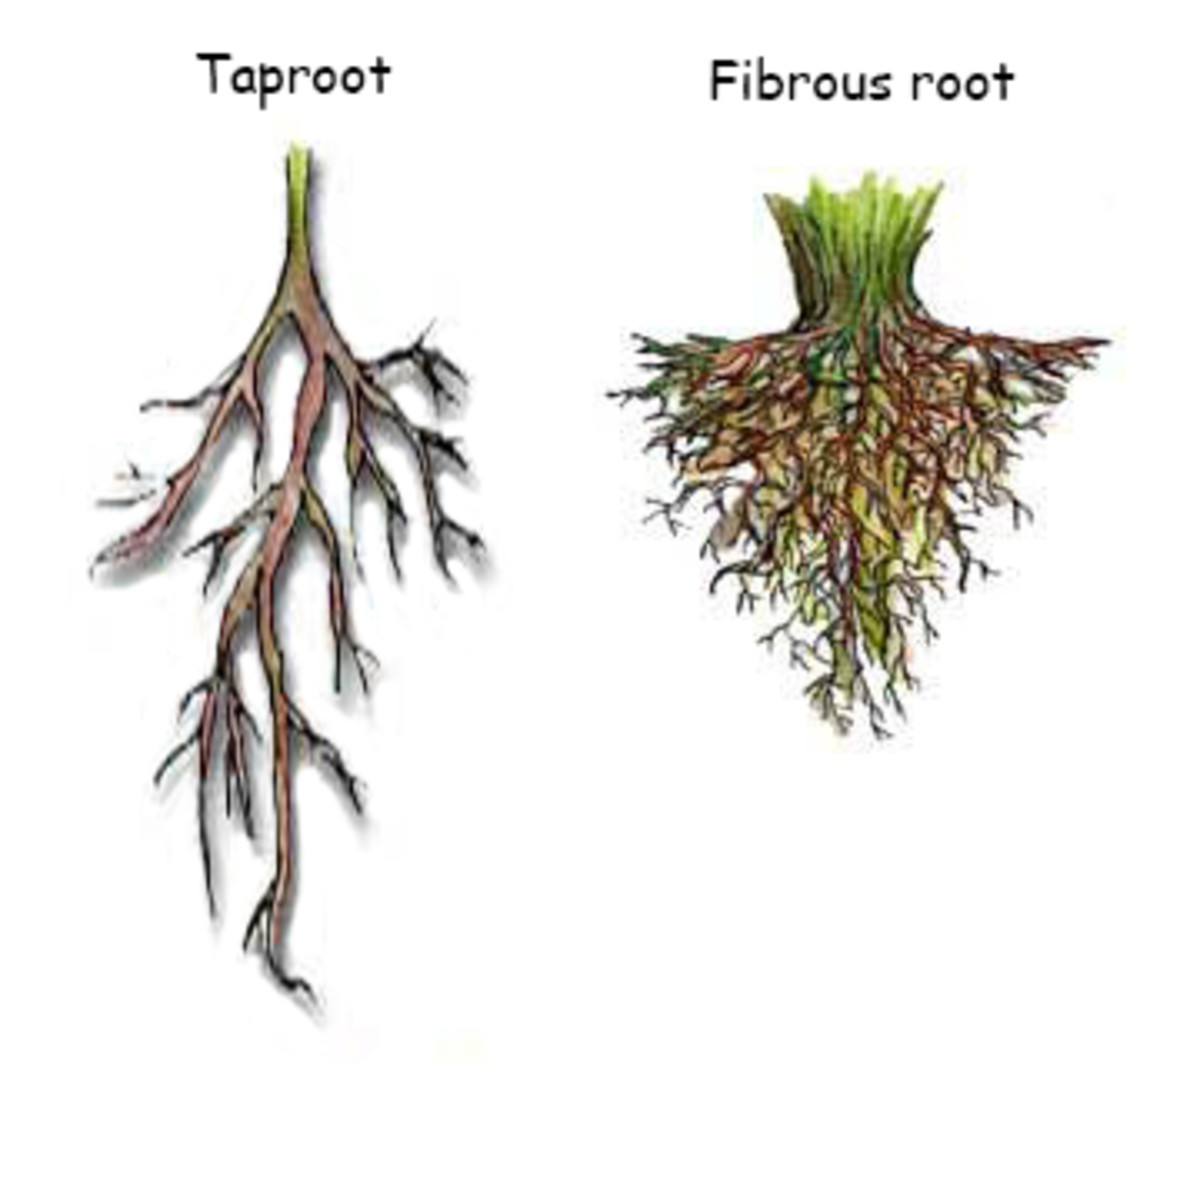 If you live in a dry climate, fibrous-rooted plants might not be the best choice.  Taproots can grow deep into the soil to find water.